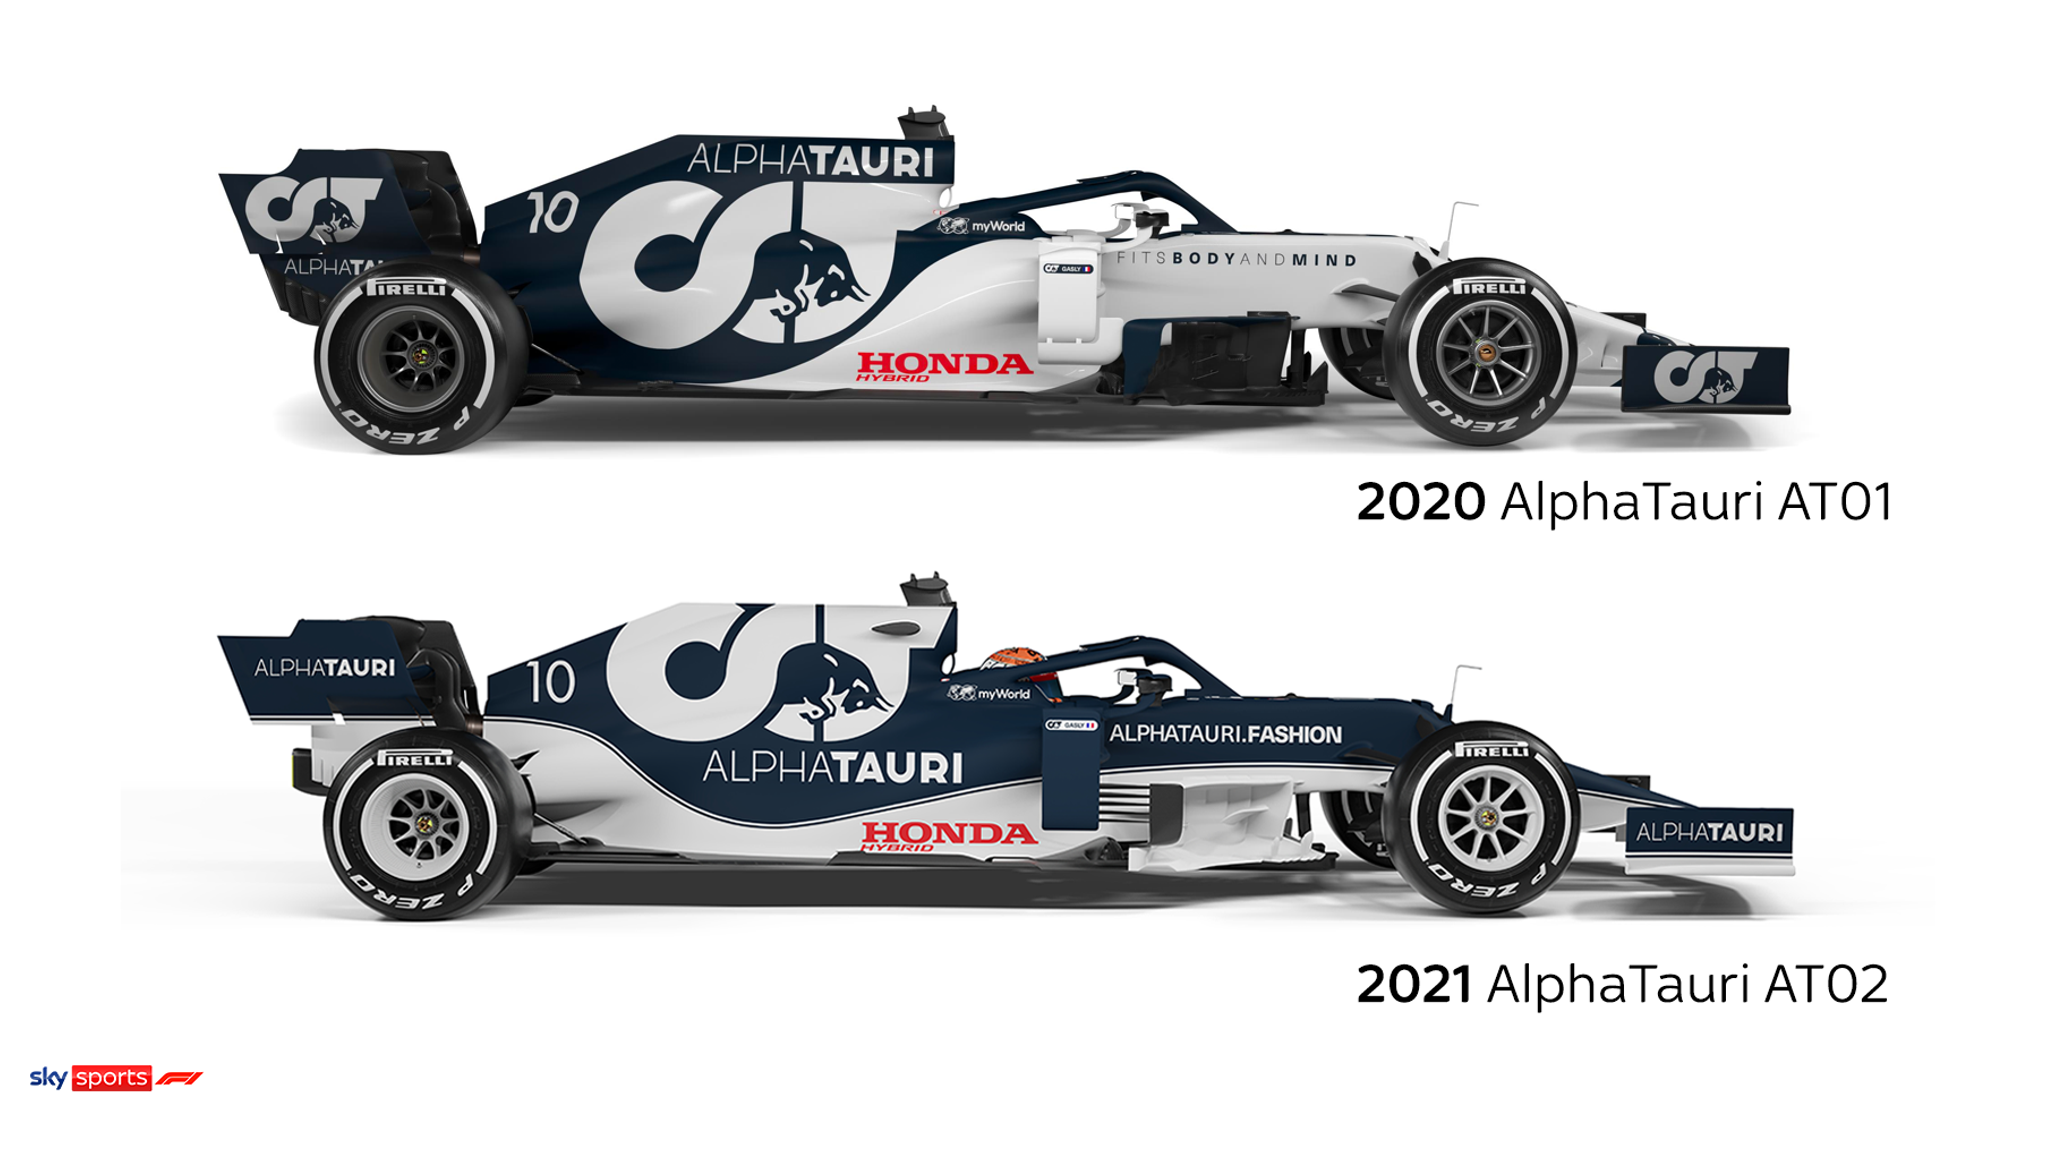 Alphatauri Launch 21 Formula 1 Car The At02 With Reworked Livery And Midfield Targets F1 News